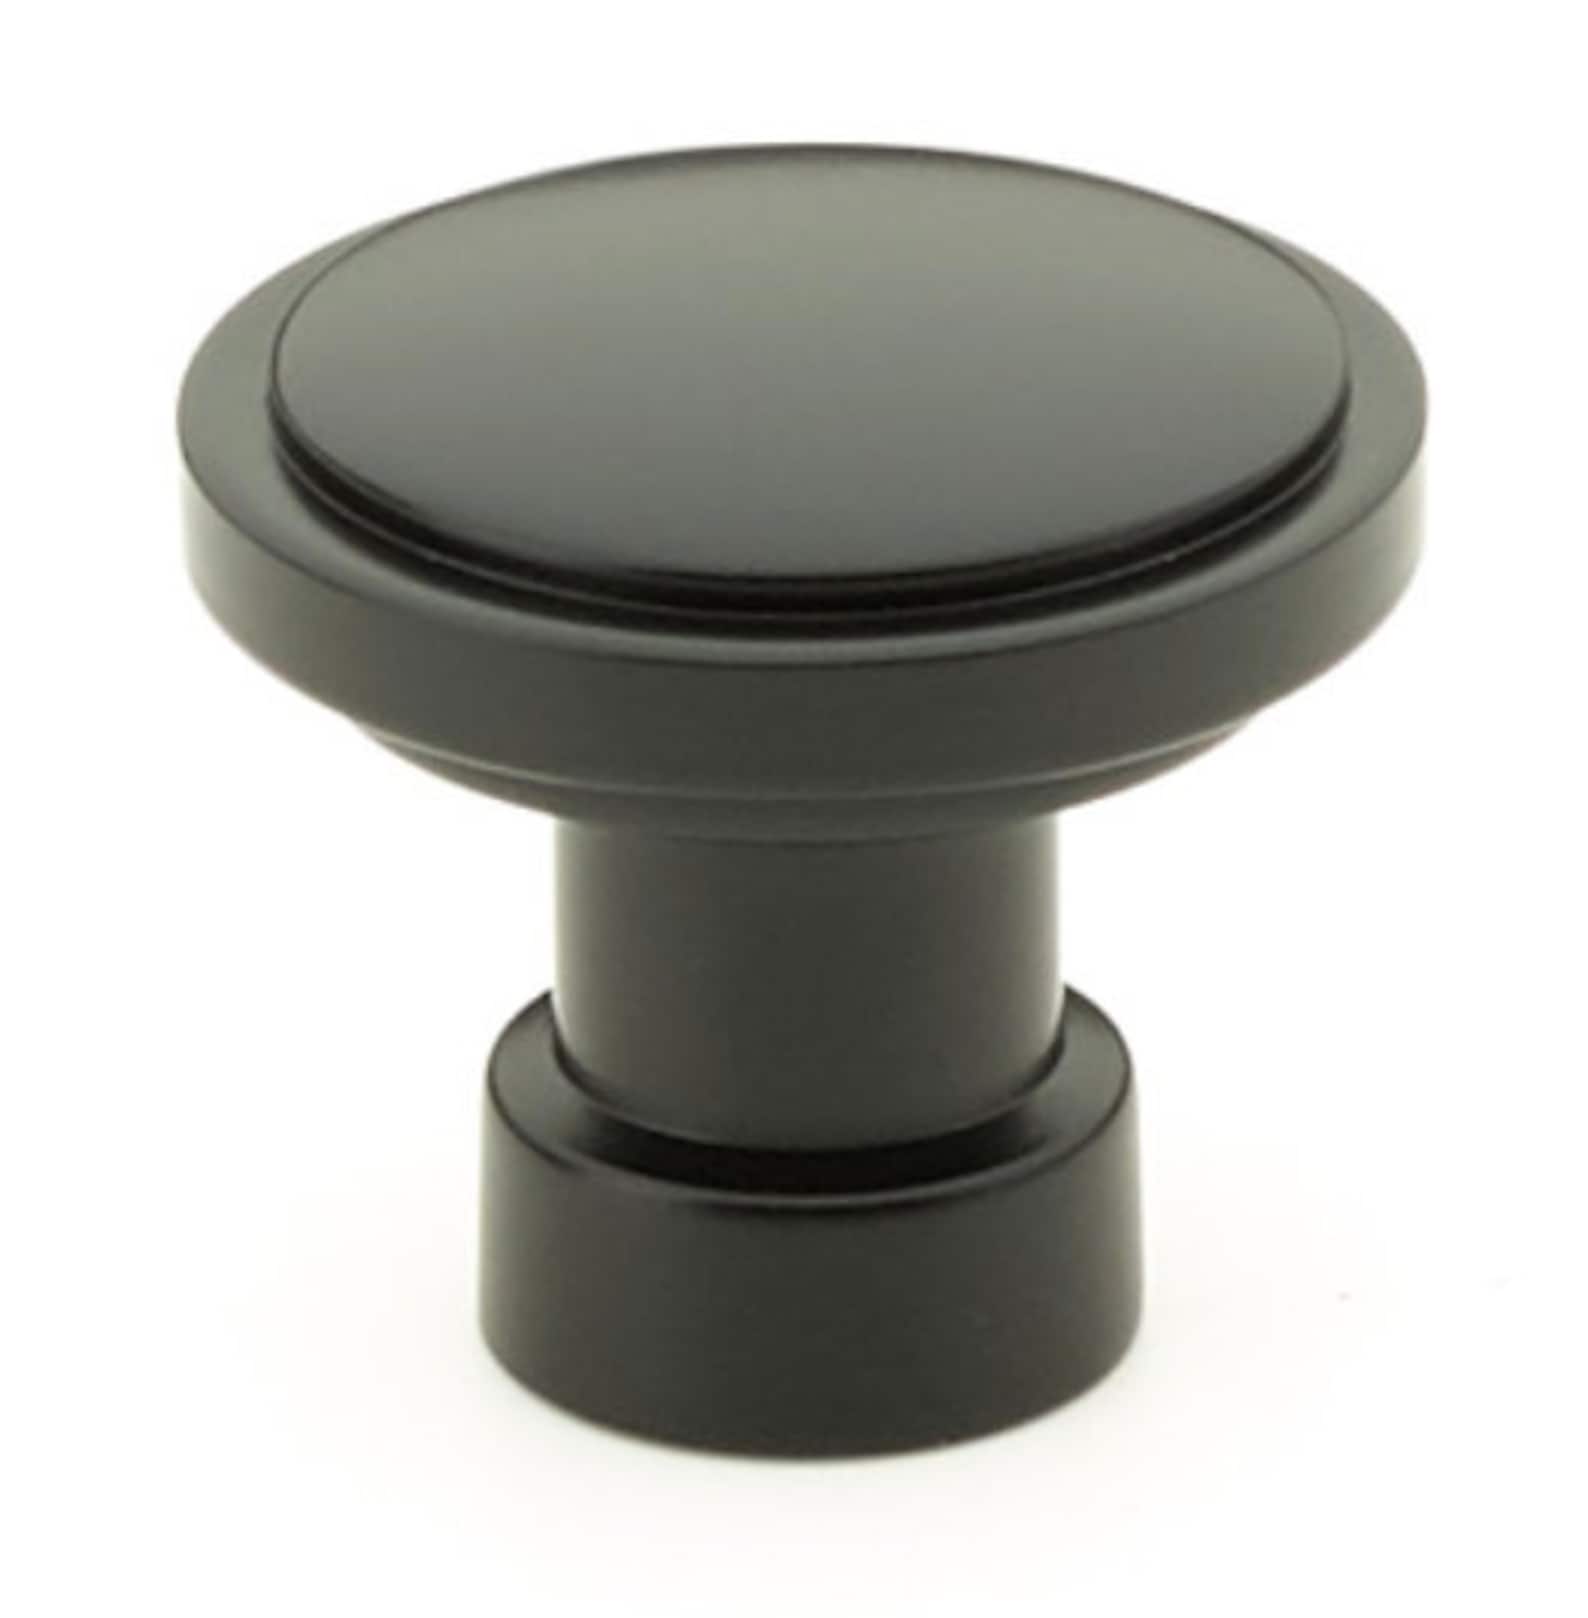 Flat Black "Industry" Cabinet Knobs and Drawer Pulls - Industry Hardware